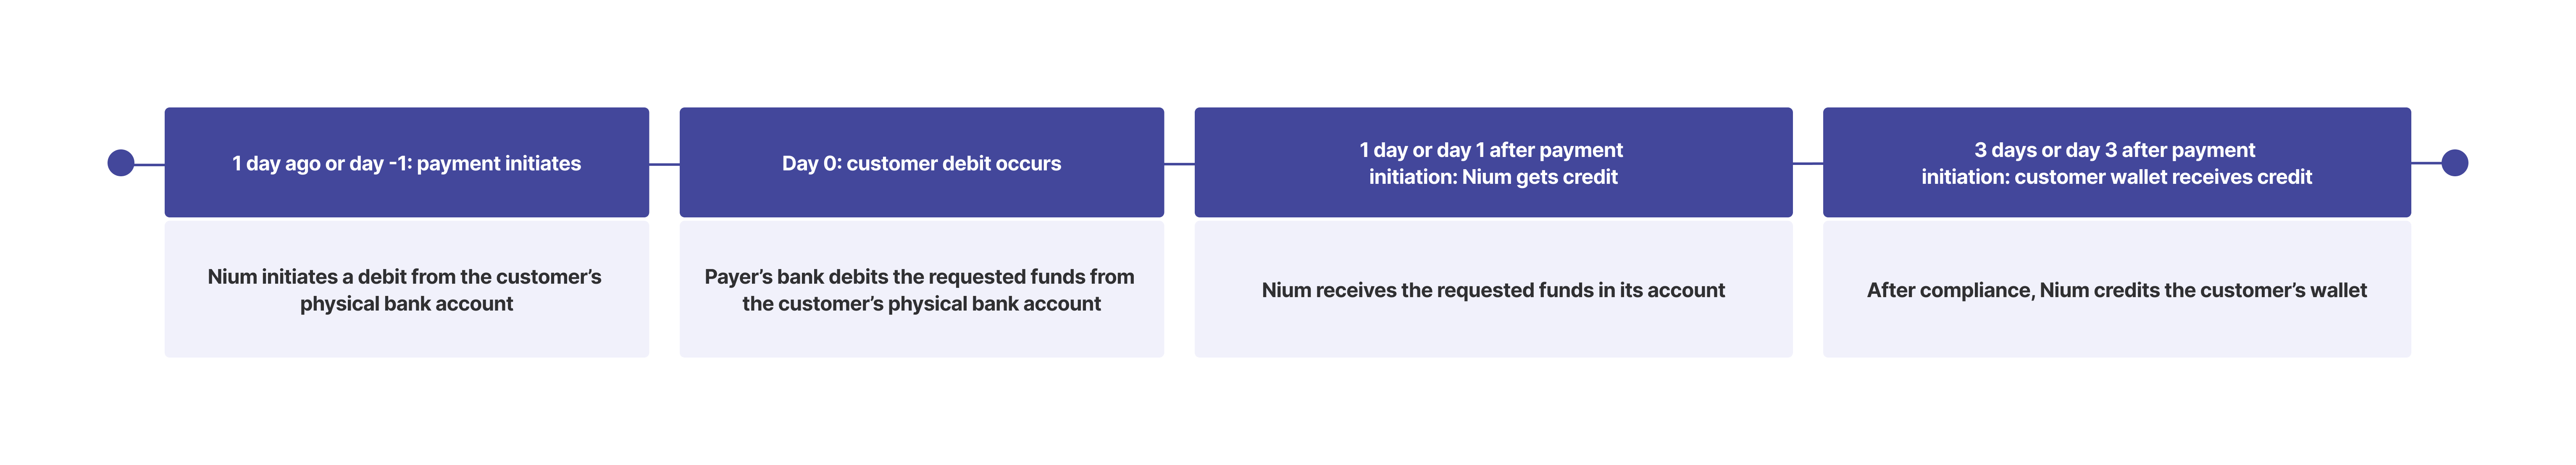 A diagram showing the settlement timing for ACH Direct Debit, which takes the standard three days.